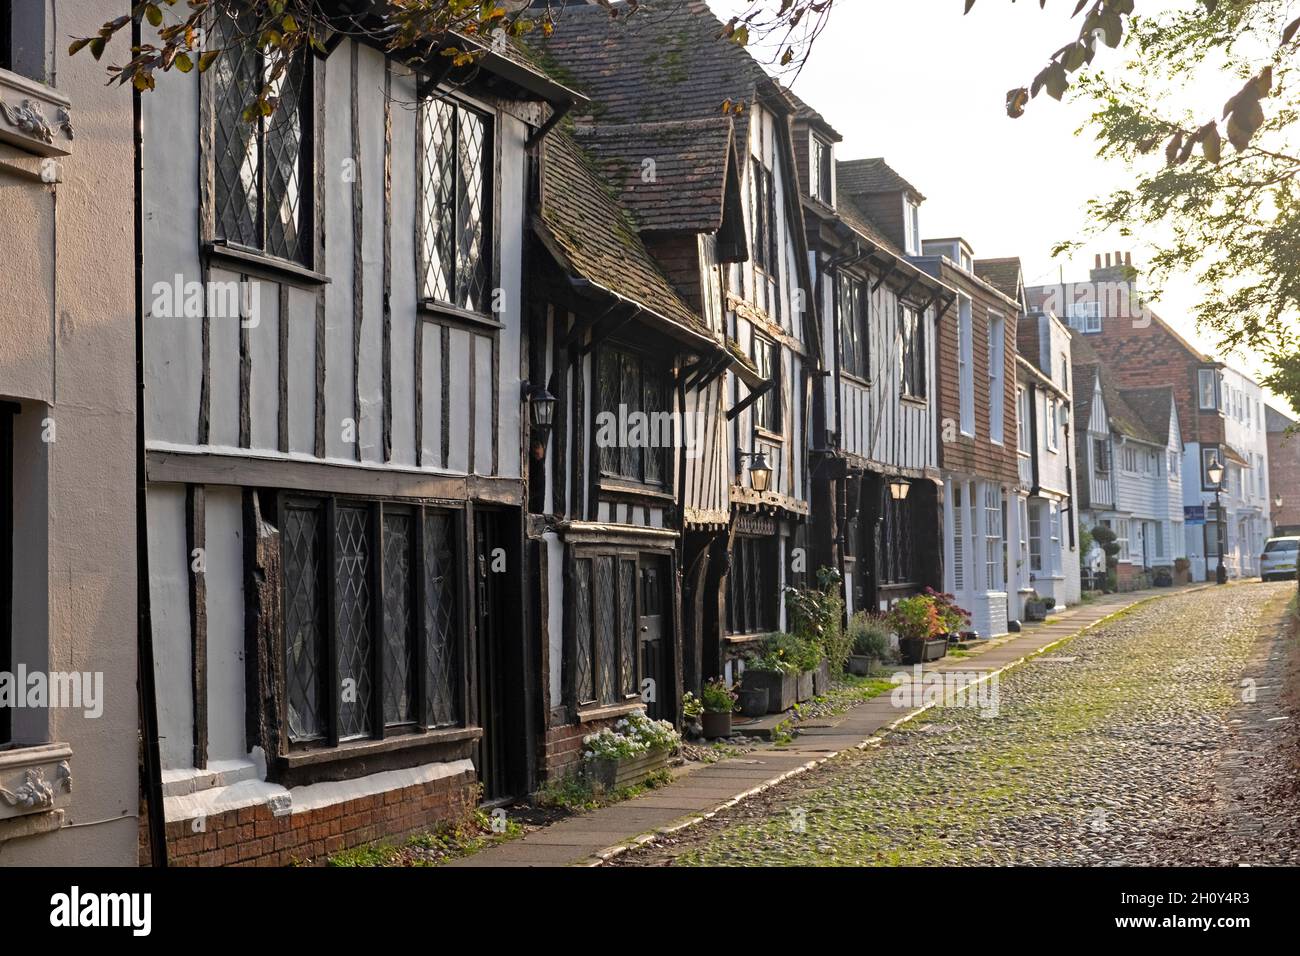 Outside view of half-timbered medieval house houses on cobbled street Church Square in Rye East Sussex England Great Britain UK KATHY DEWITT Stock Photo